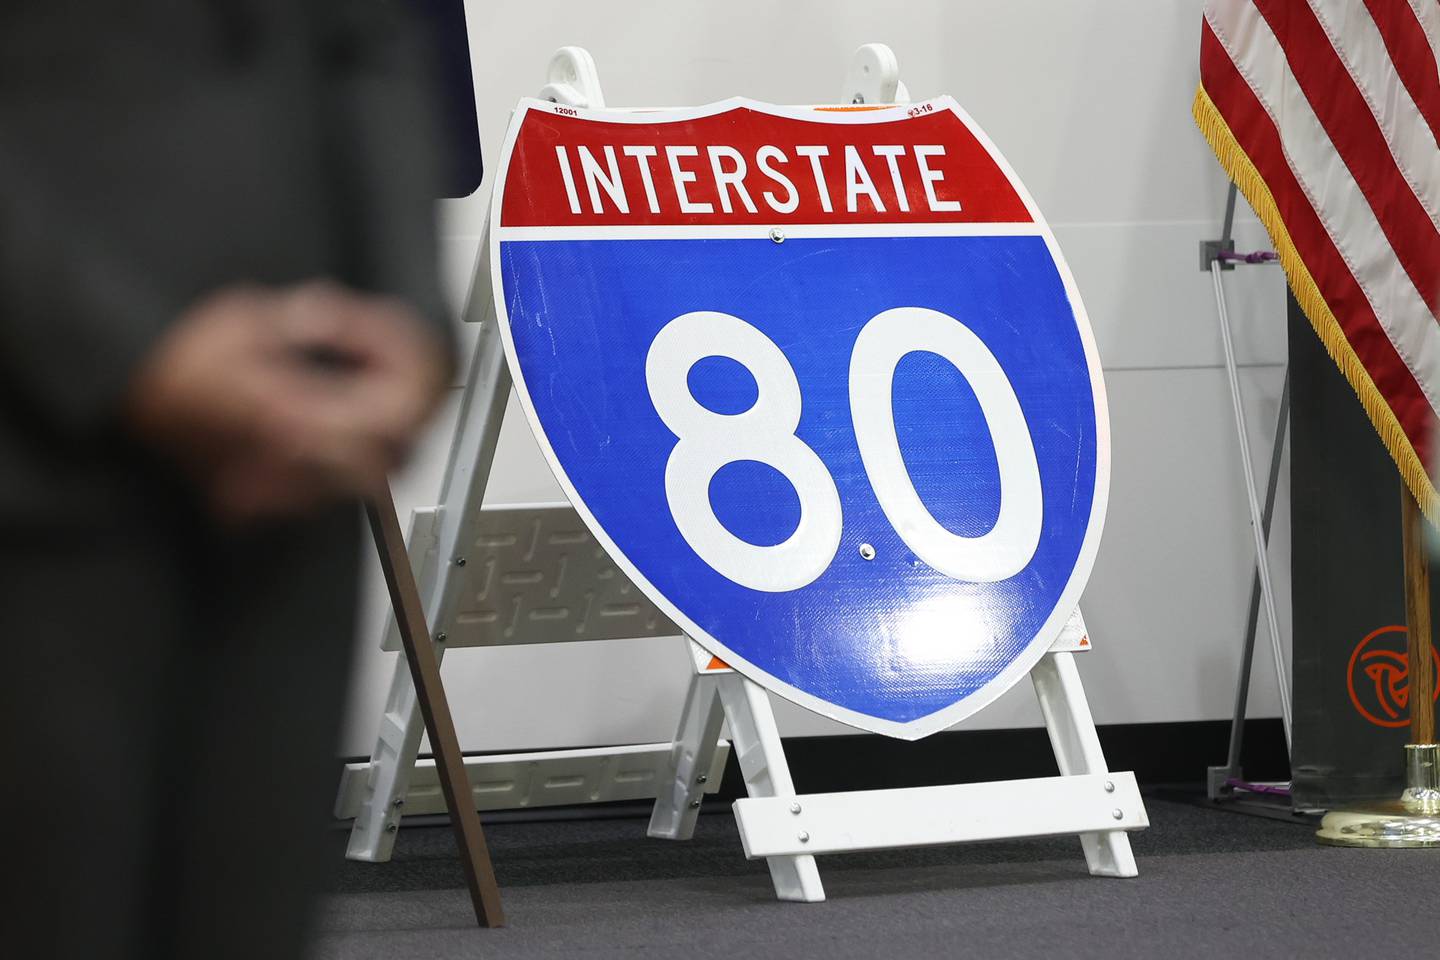 An Interstate 80 sign is displayed during a press conference at Joliet Junior College. State representatives held a press conference about the Rebuild Illinois project and more specifically the extension of Houbolt Road. Thursday, Jan. 20, 2022 in Joliet.